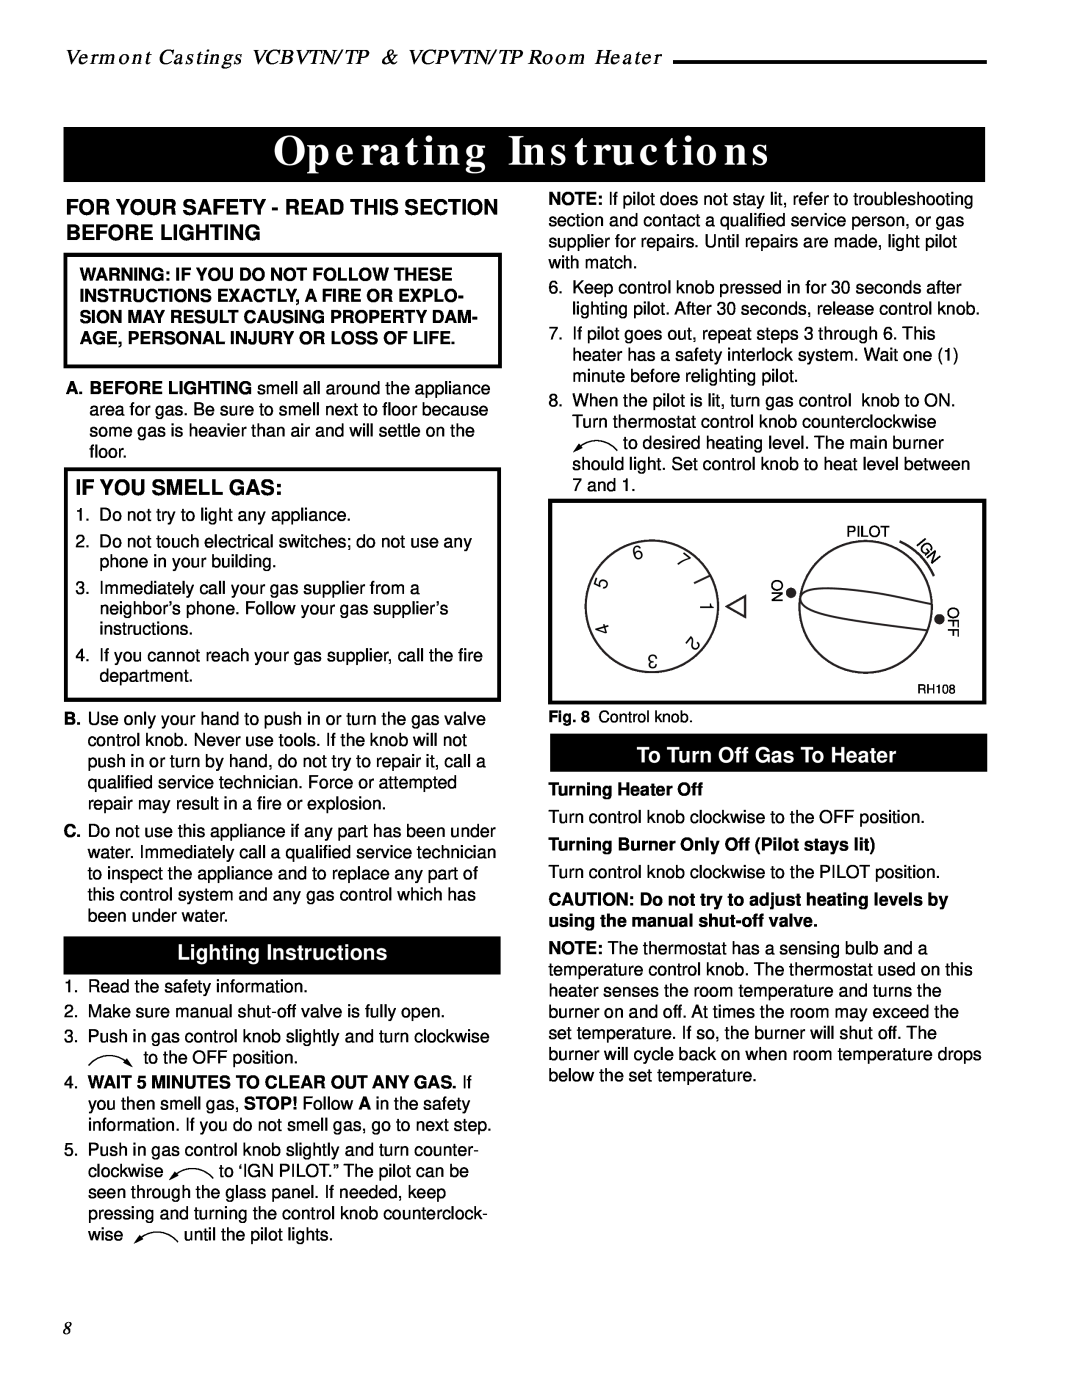 Vermont Casting VCPV10TP  Operating Instructions, If You Smell Gas, Lighting Instructions, To Turn Off Gas To Heater 